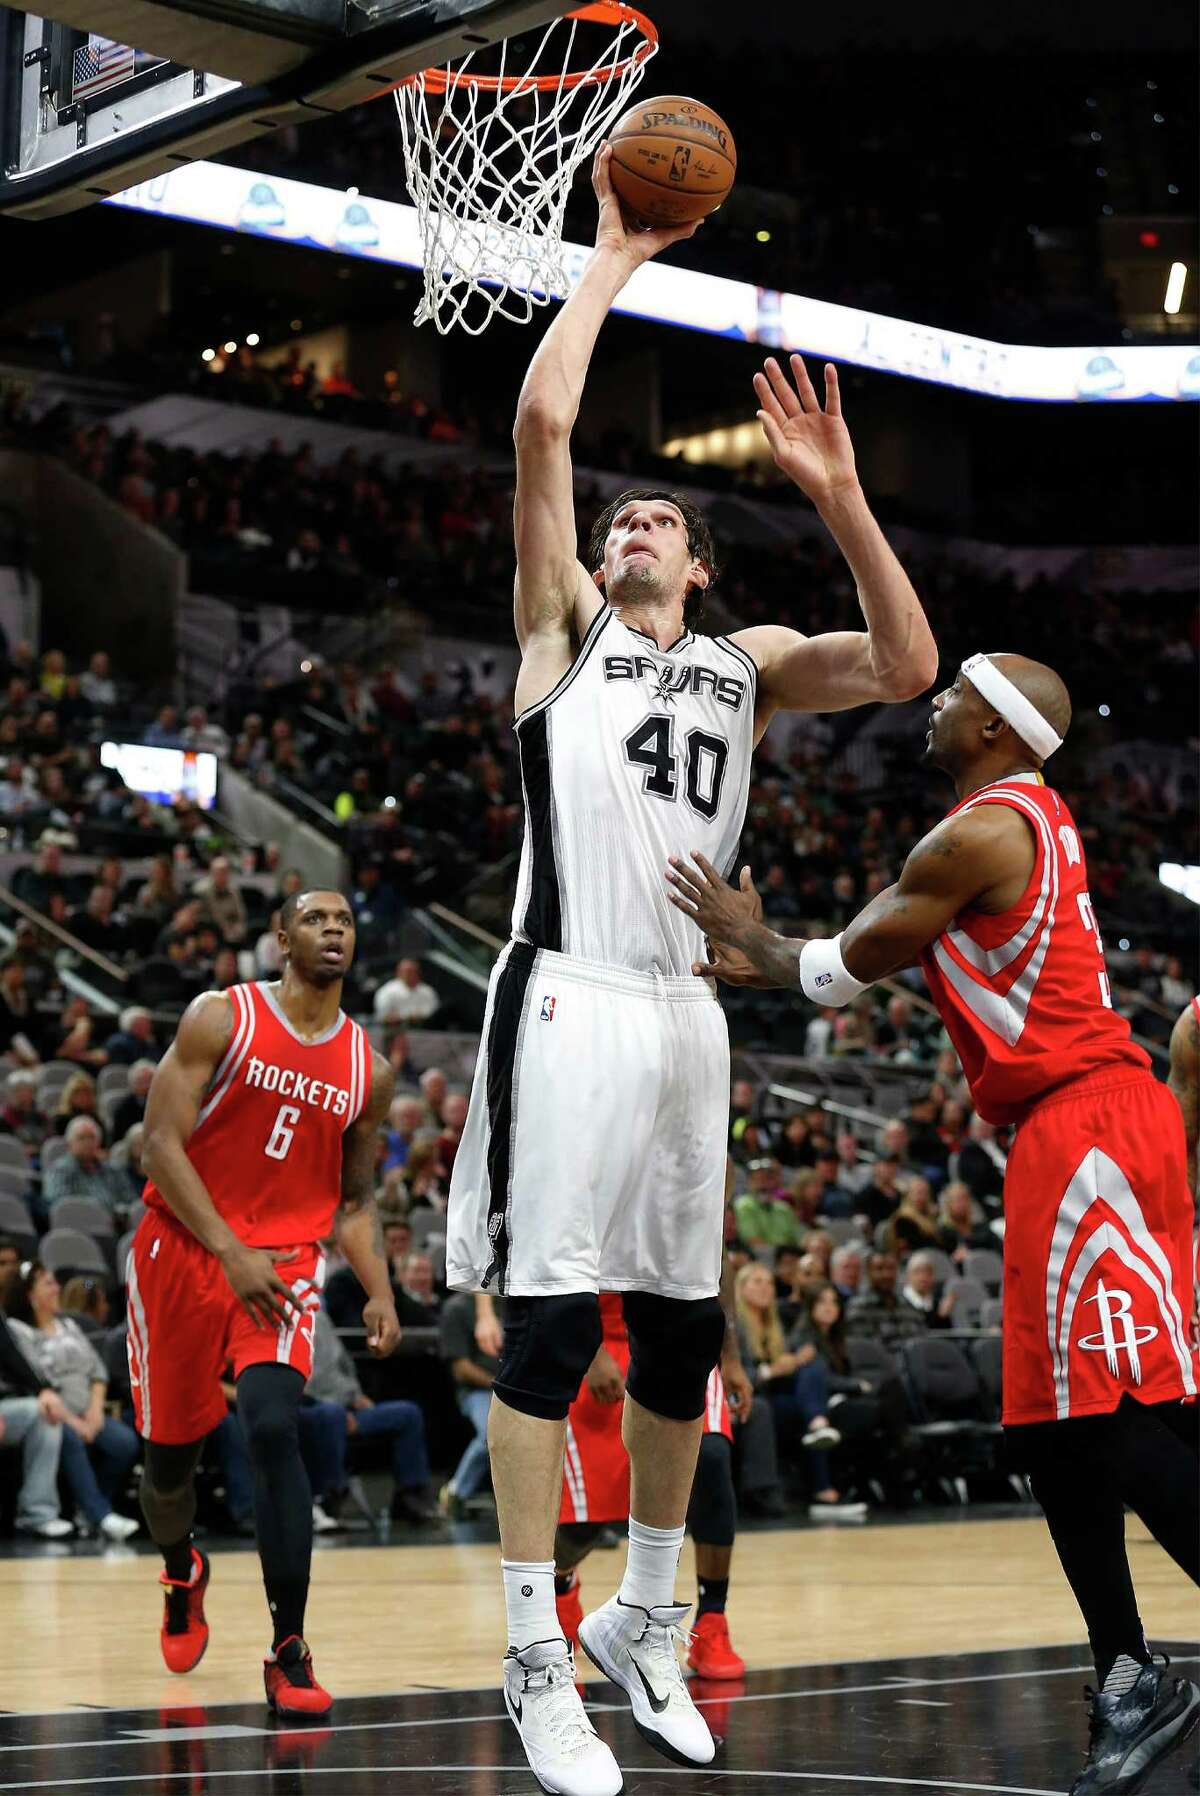 Spurs' Boban Marjanovic (40) goes up to score against Houston Rockets' Jason Terry (31) at the AT&T Center on Wednesday, Jan. 27, 2016. Spurs defeated the Rockets, 130-99. (Kin Man Hui/San Antonio Express-News)